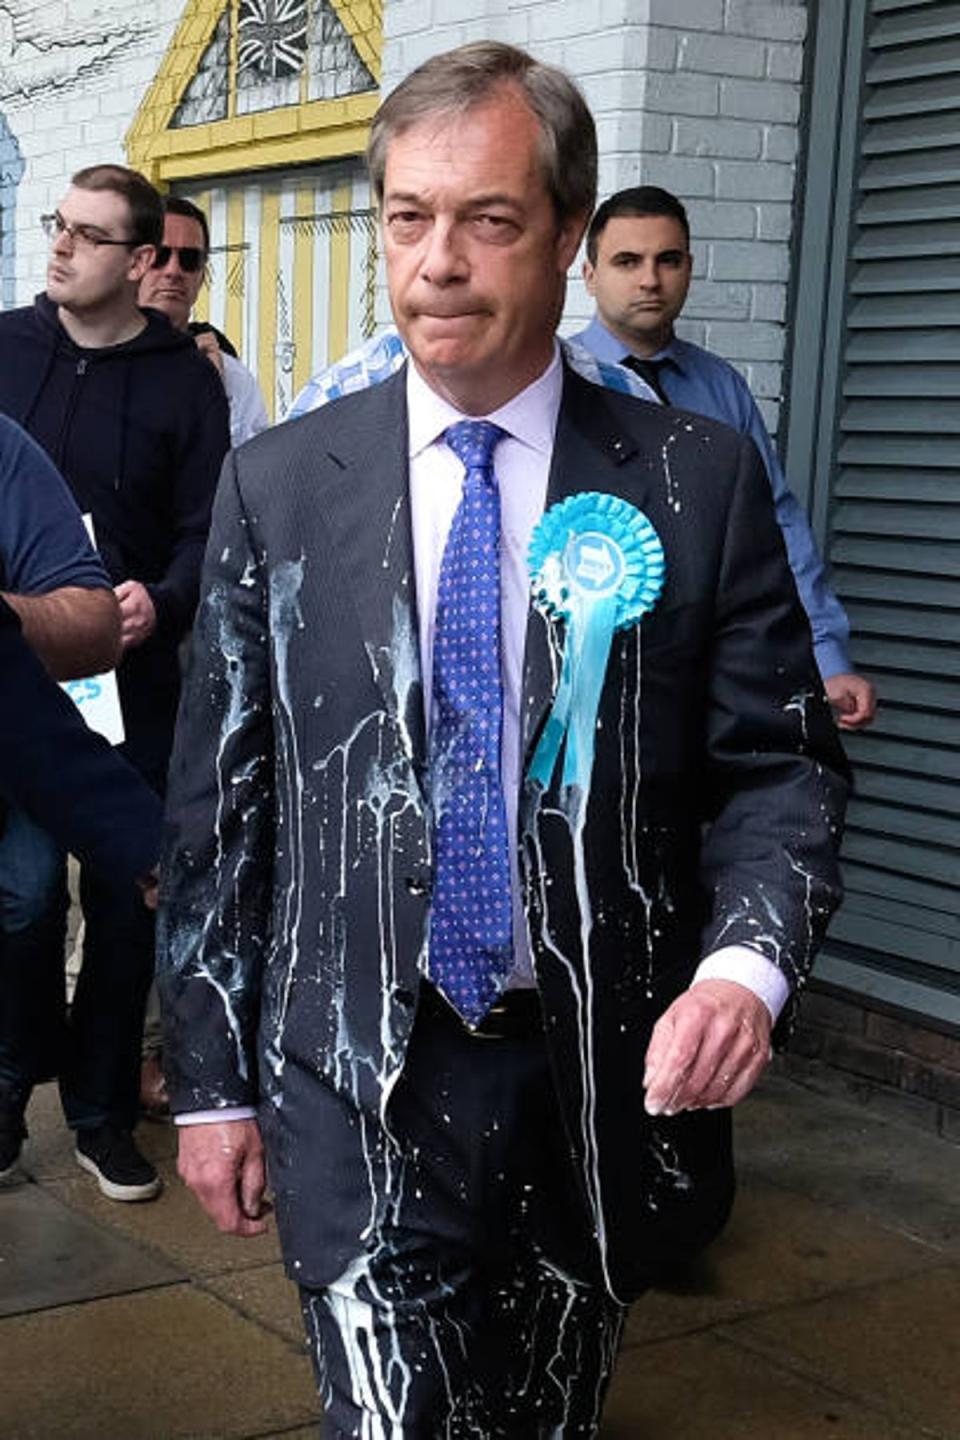 Brexit Party leader Nigel Farage is escorted to a car after having what is thought to be a milkshake thrown over him as he visits Northumberland Street in Newcastle upon Tyne during a whistle-stop UK tour on May 20, 2019 (Ian Forsyth / Getty Images)